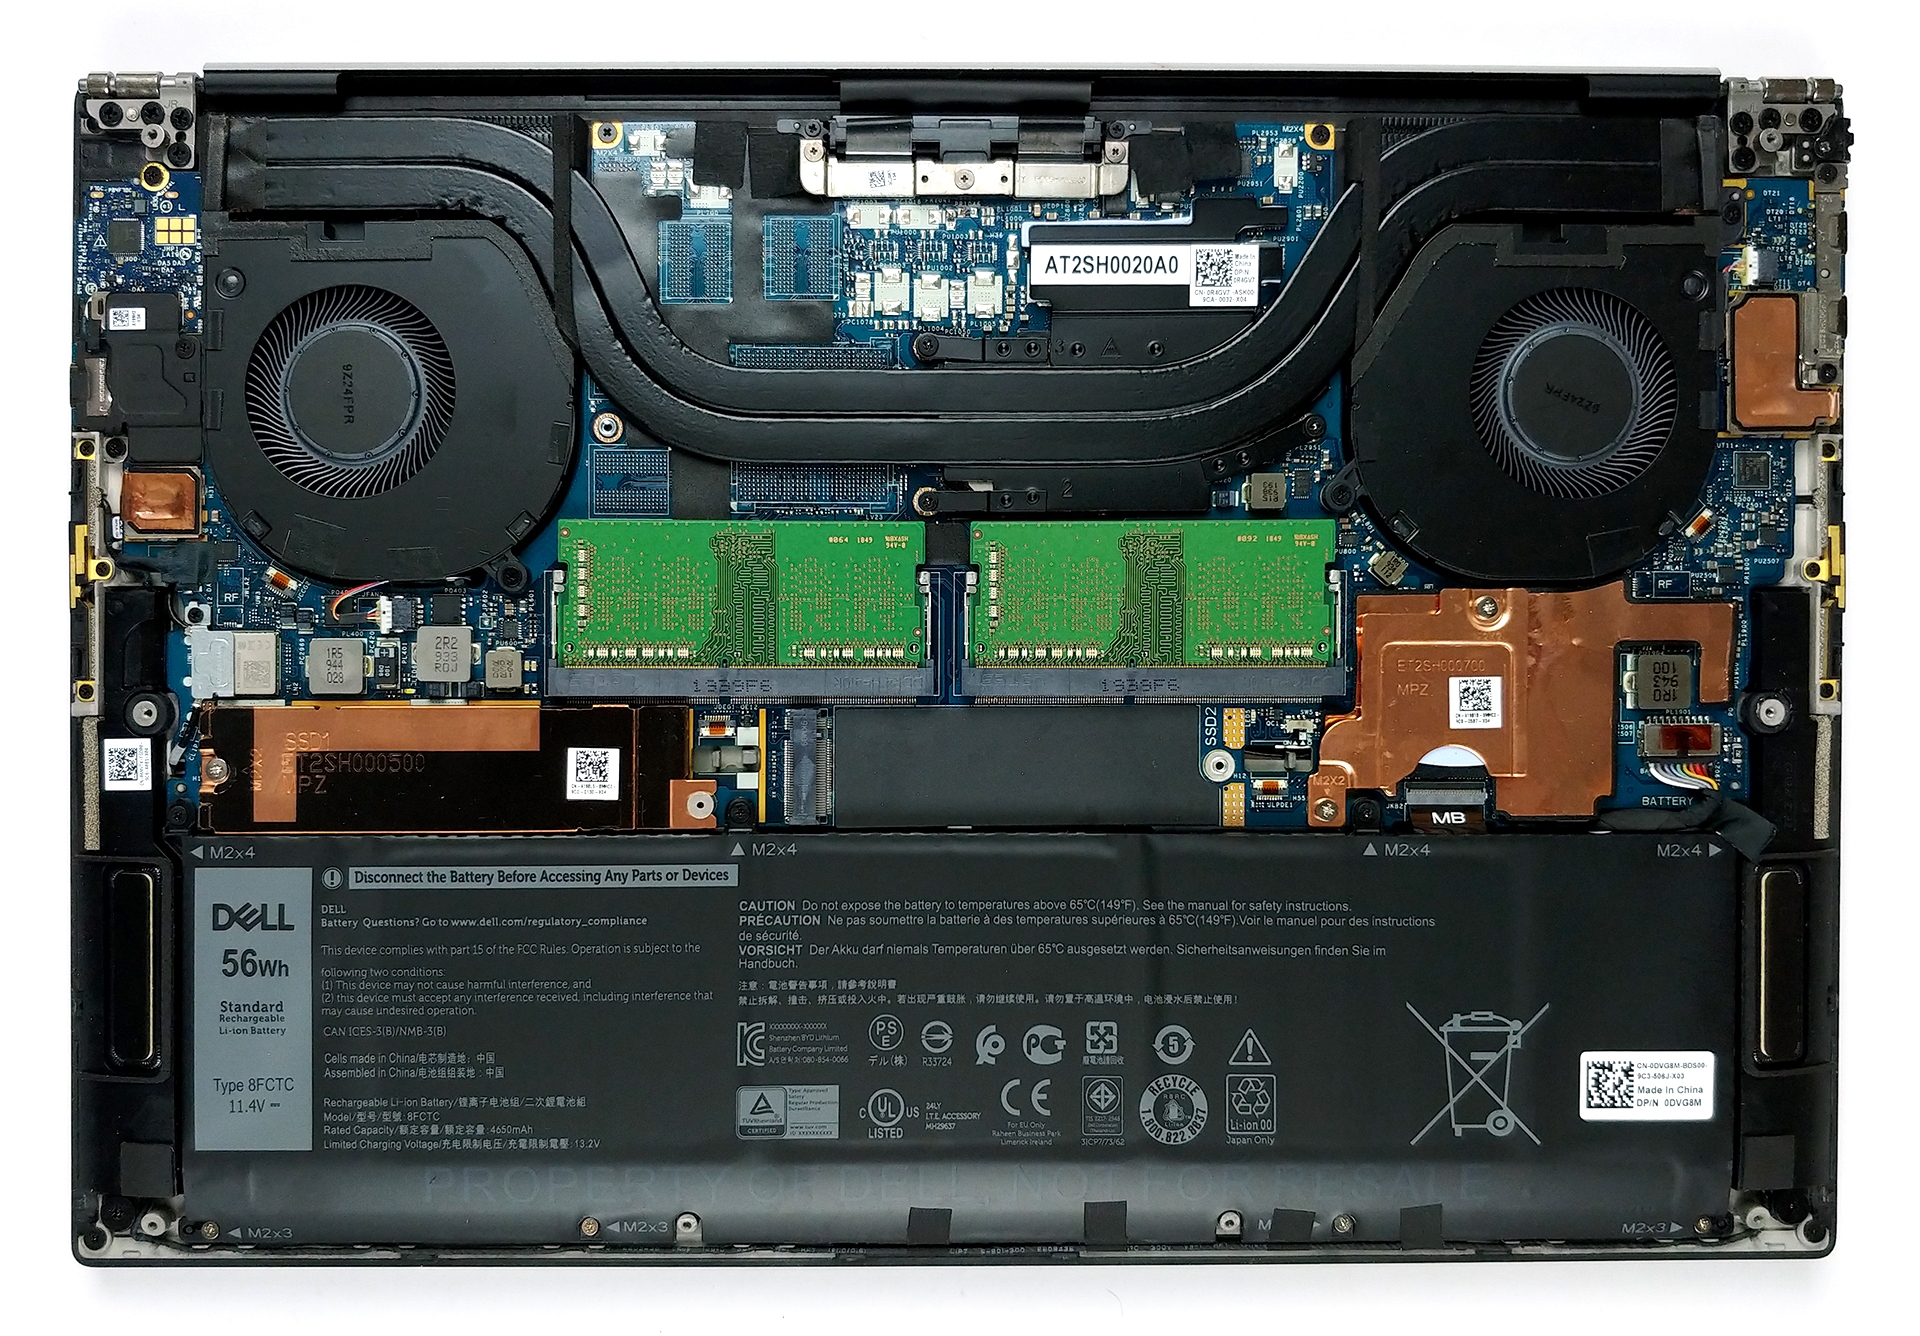 Inside Dell XPS 15 9500 - disassembly and upgrade options | LaptopMedia.com